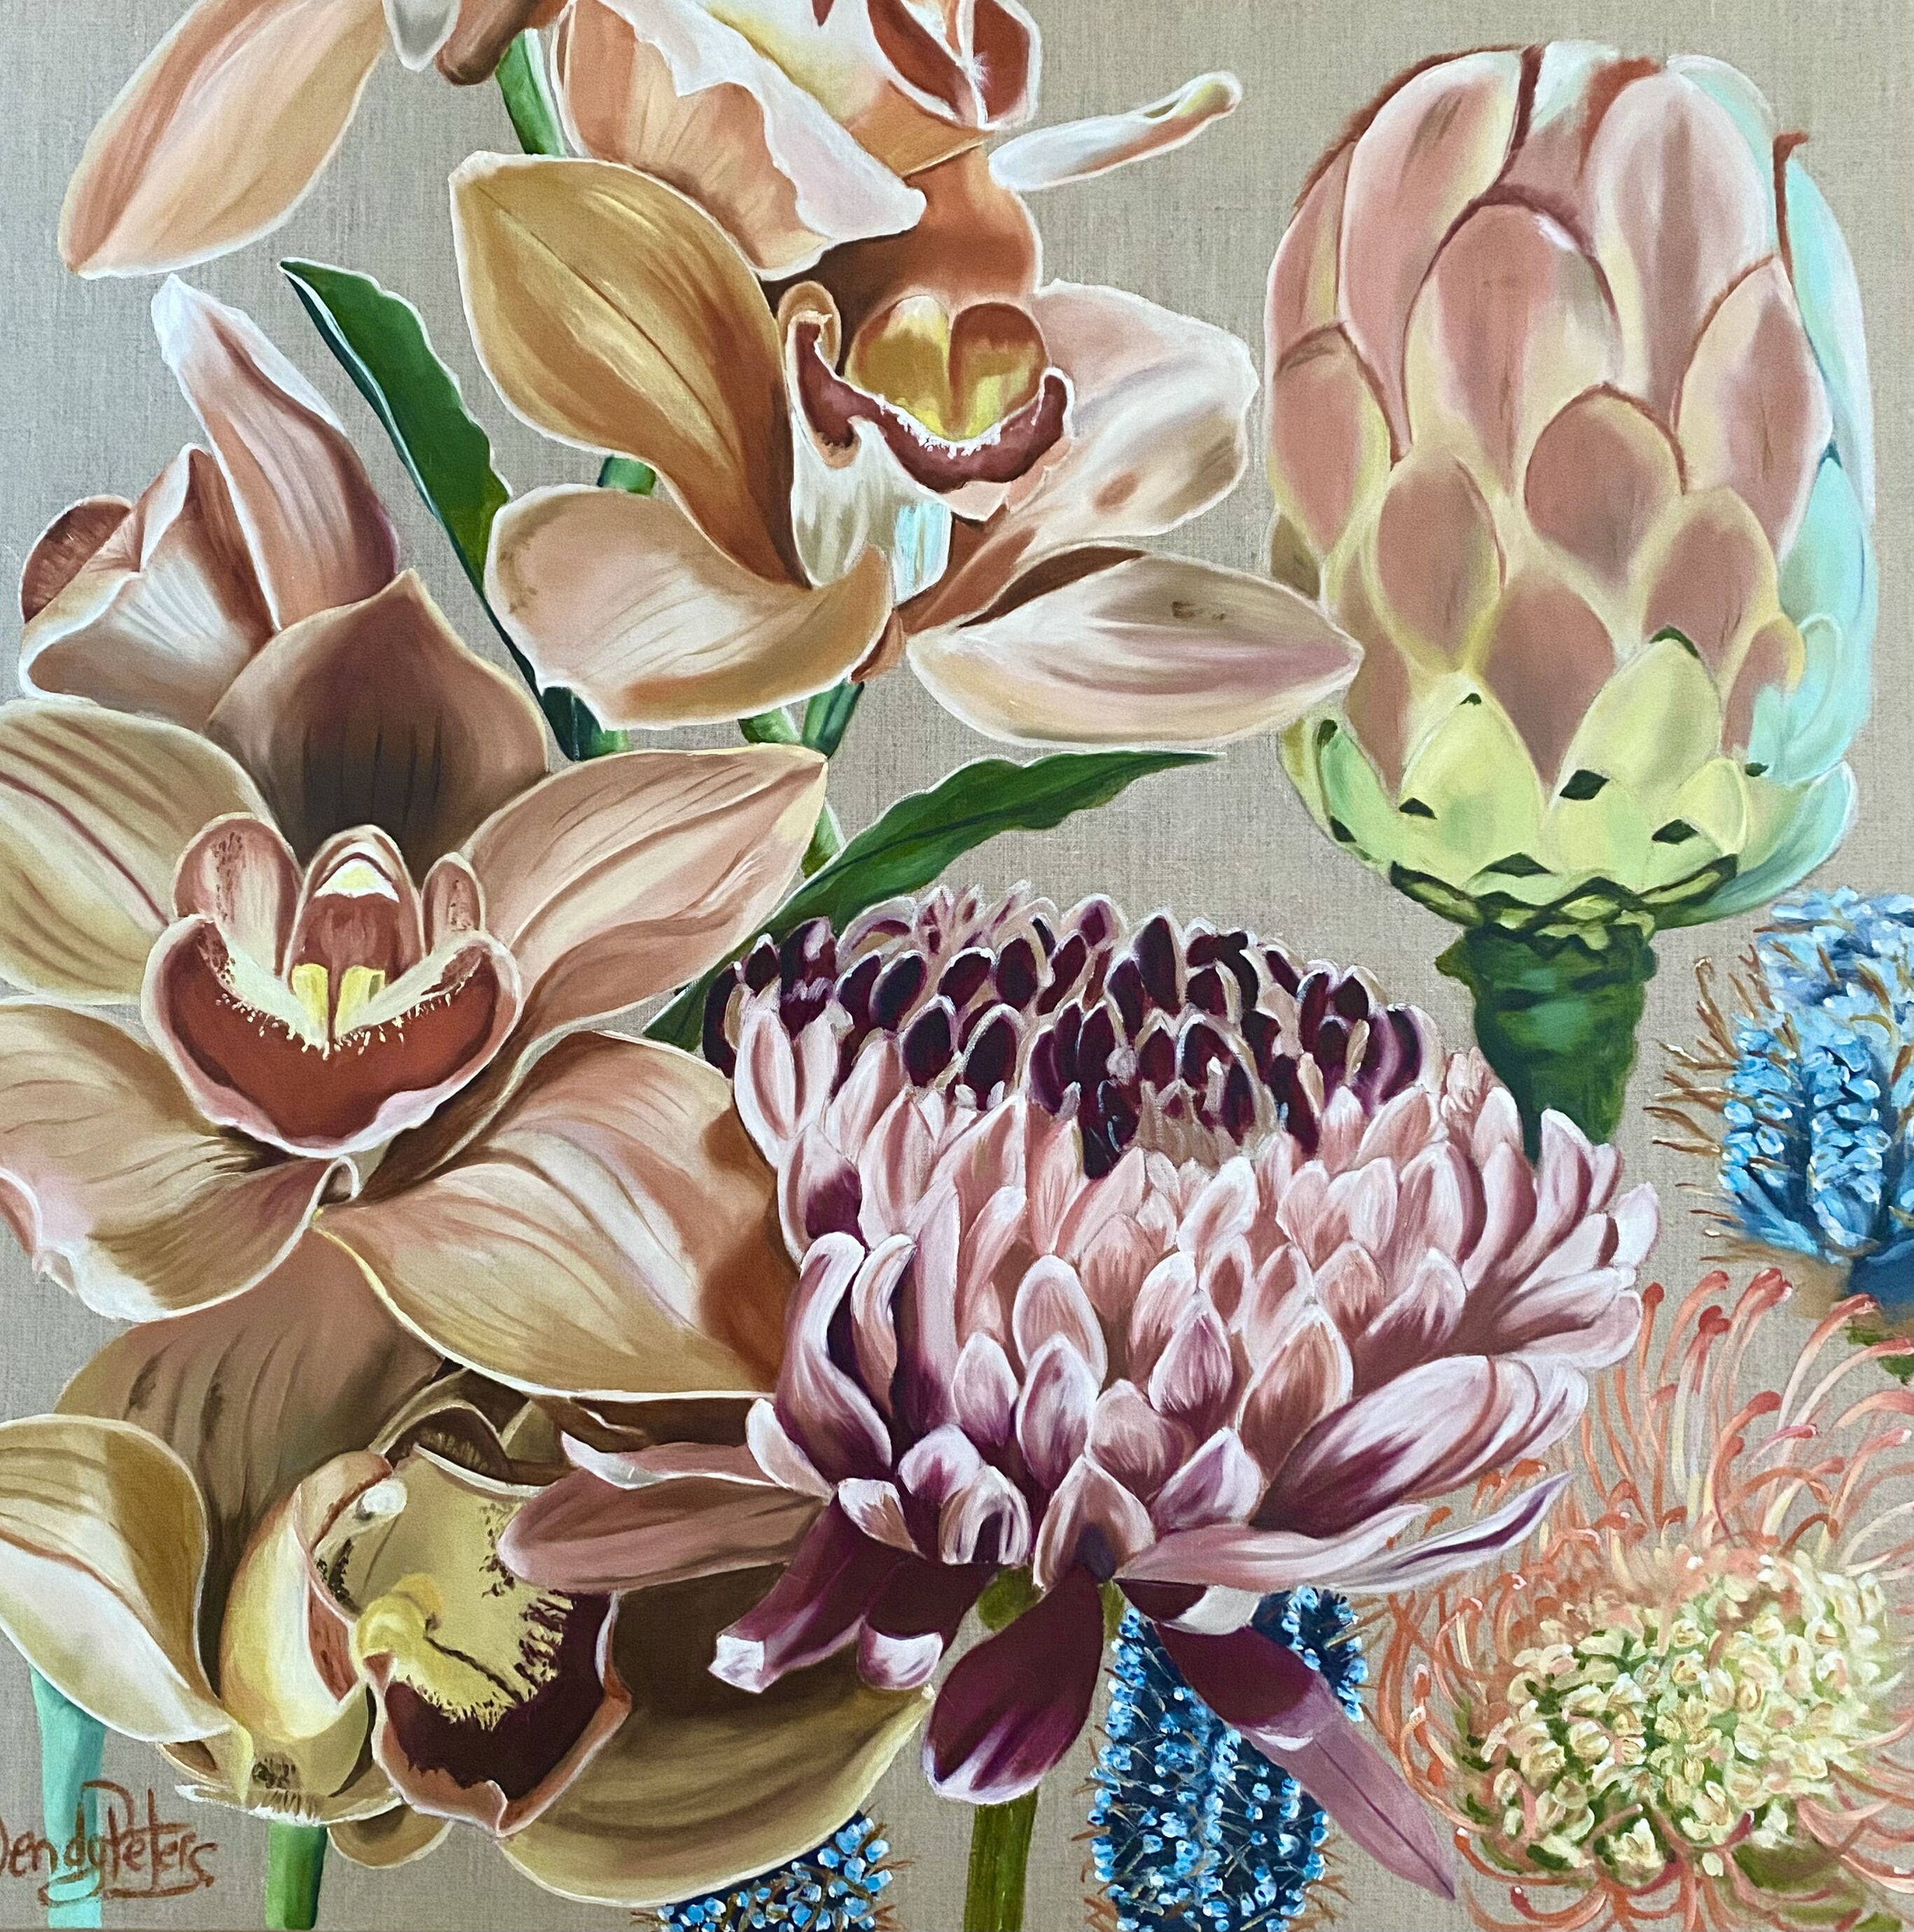 The Peachy Orchids_oil_76x76_Wendy_Peters